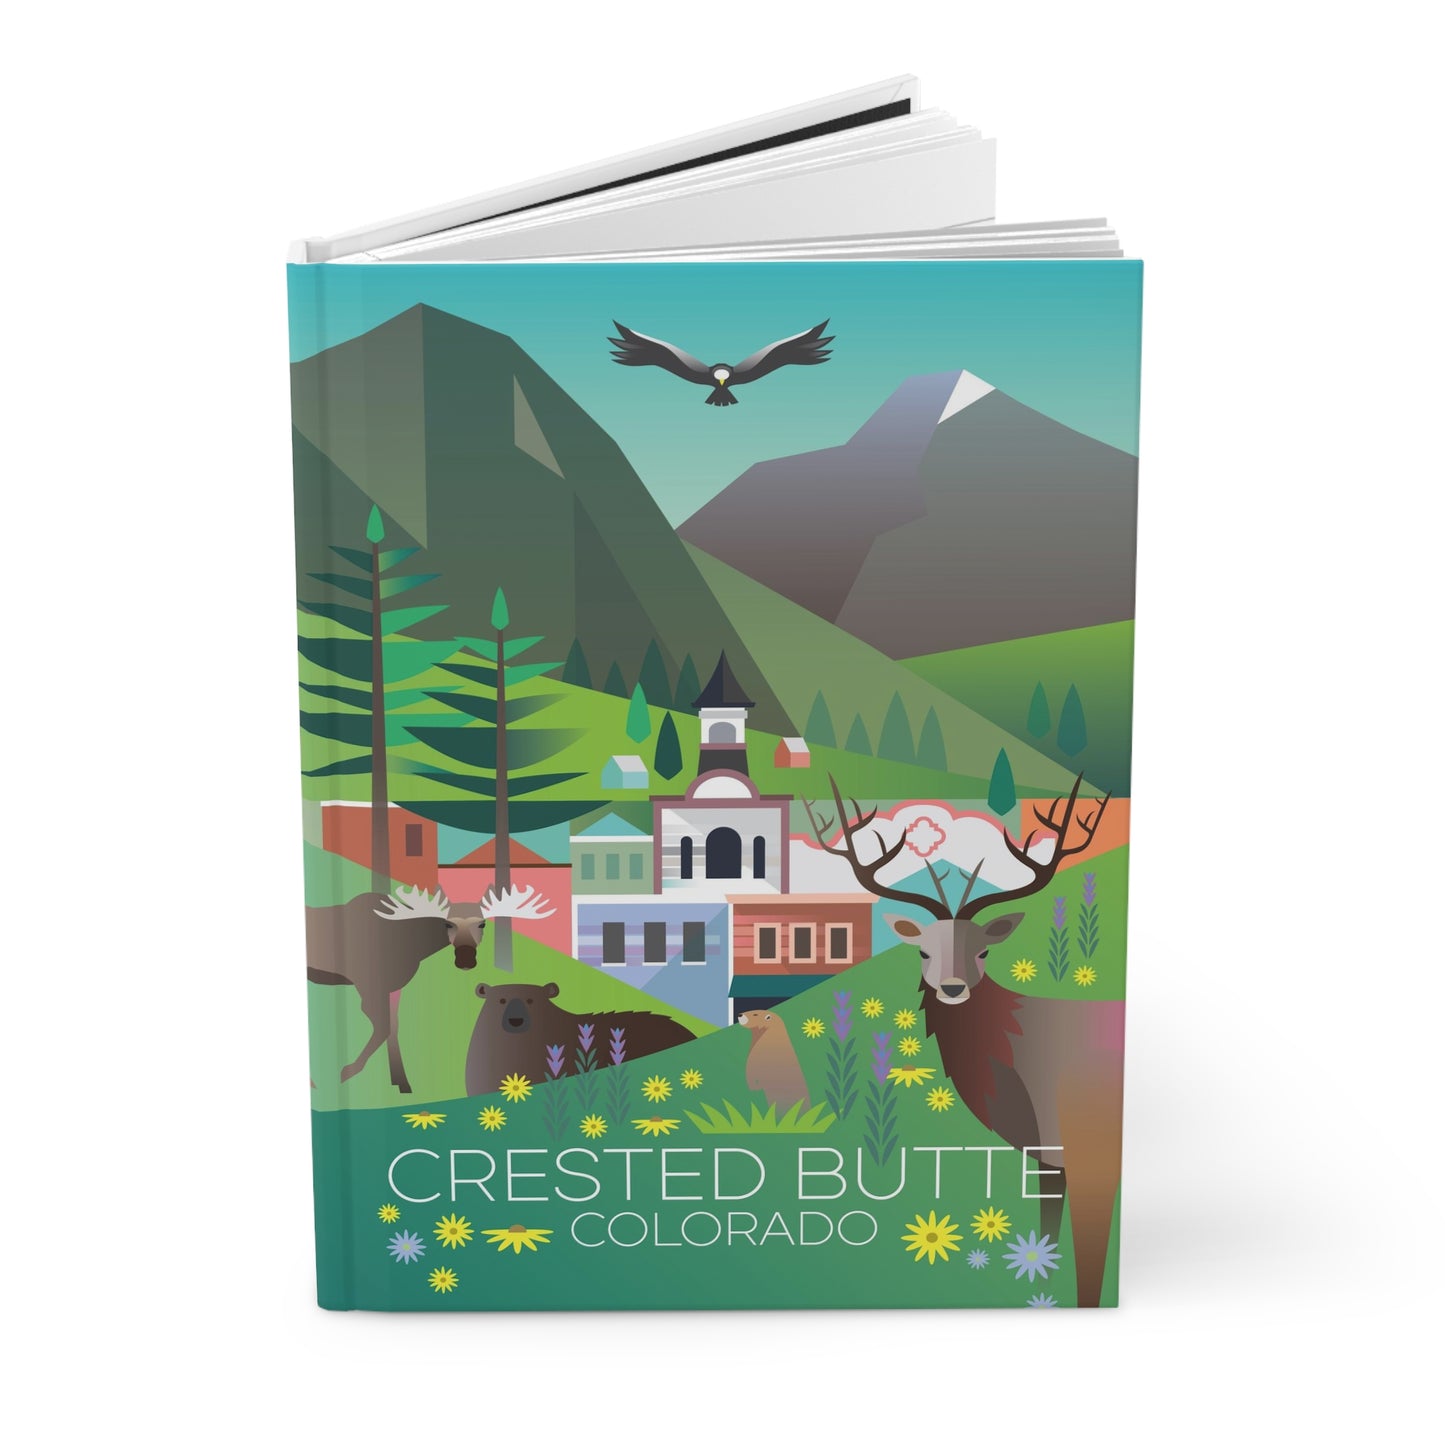 Crested Butte Sommer-Hardcover-Tagebuch